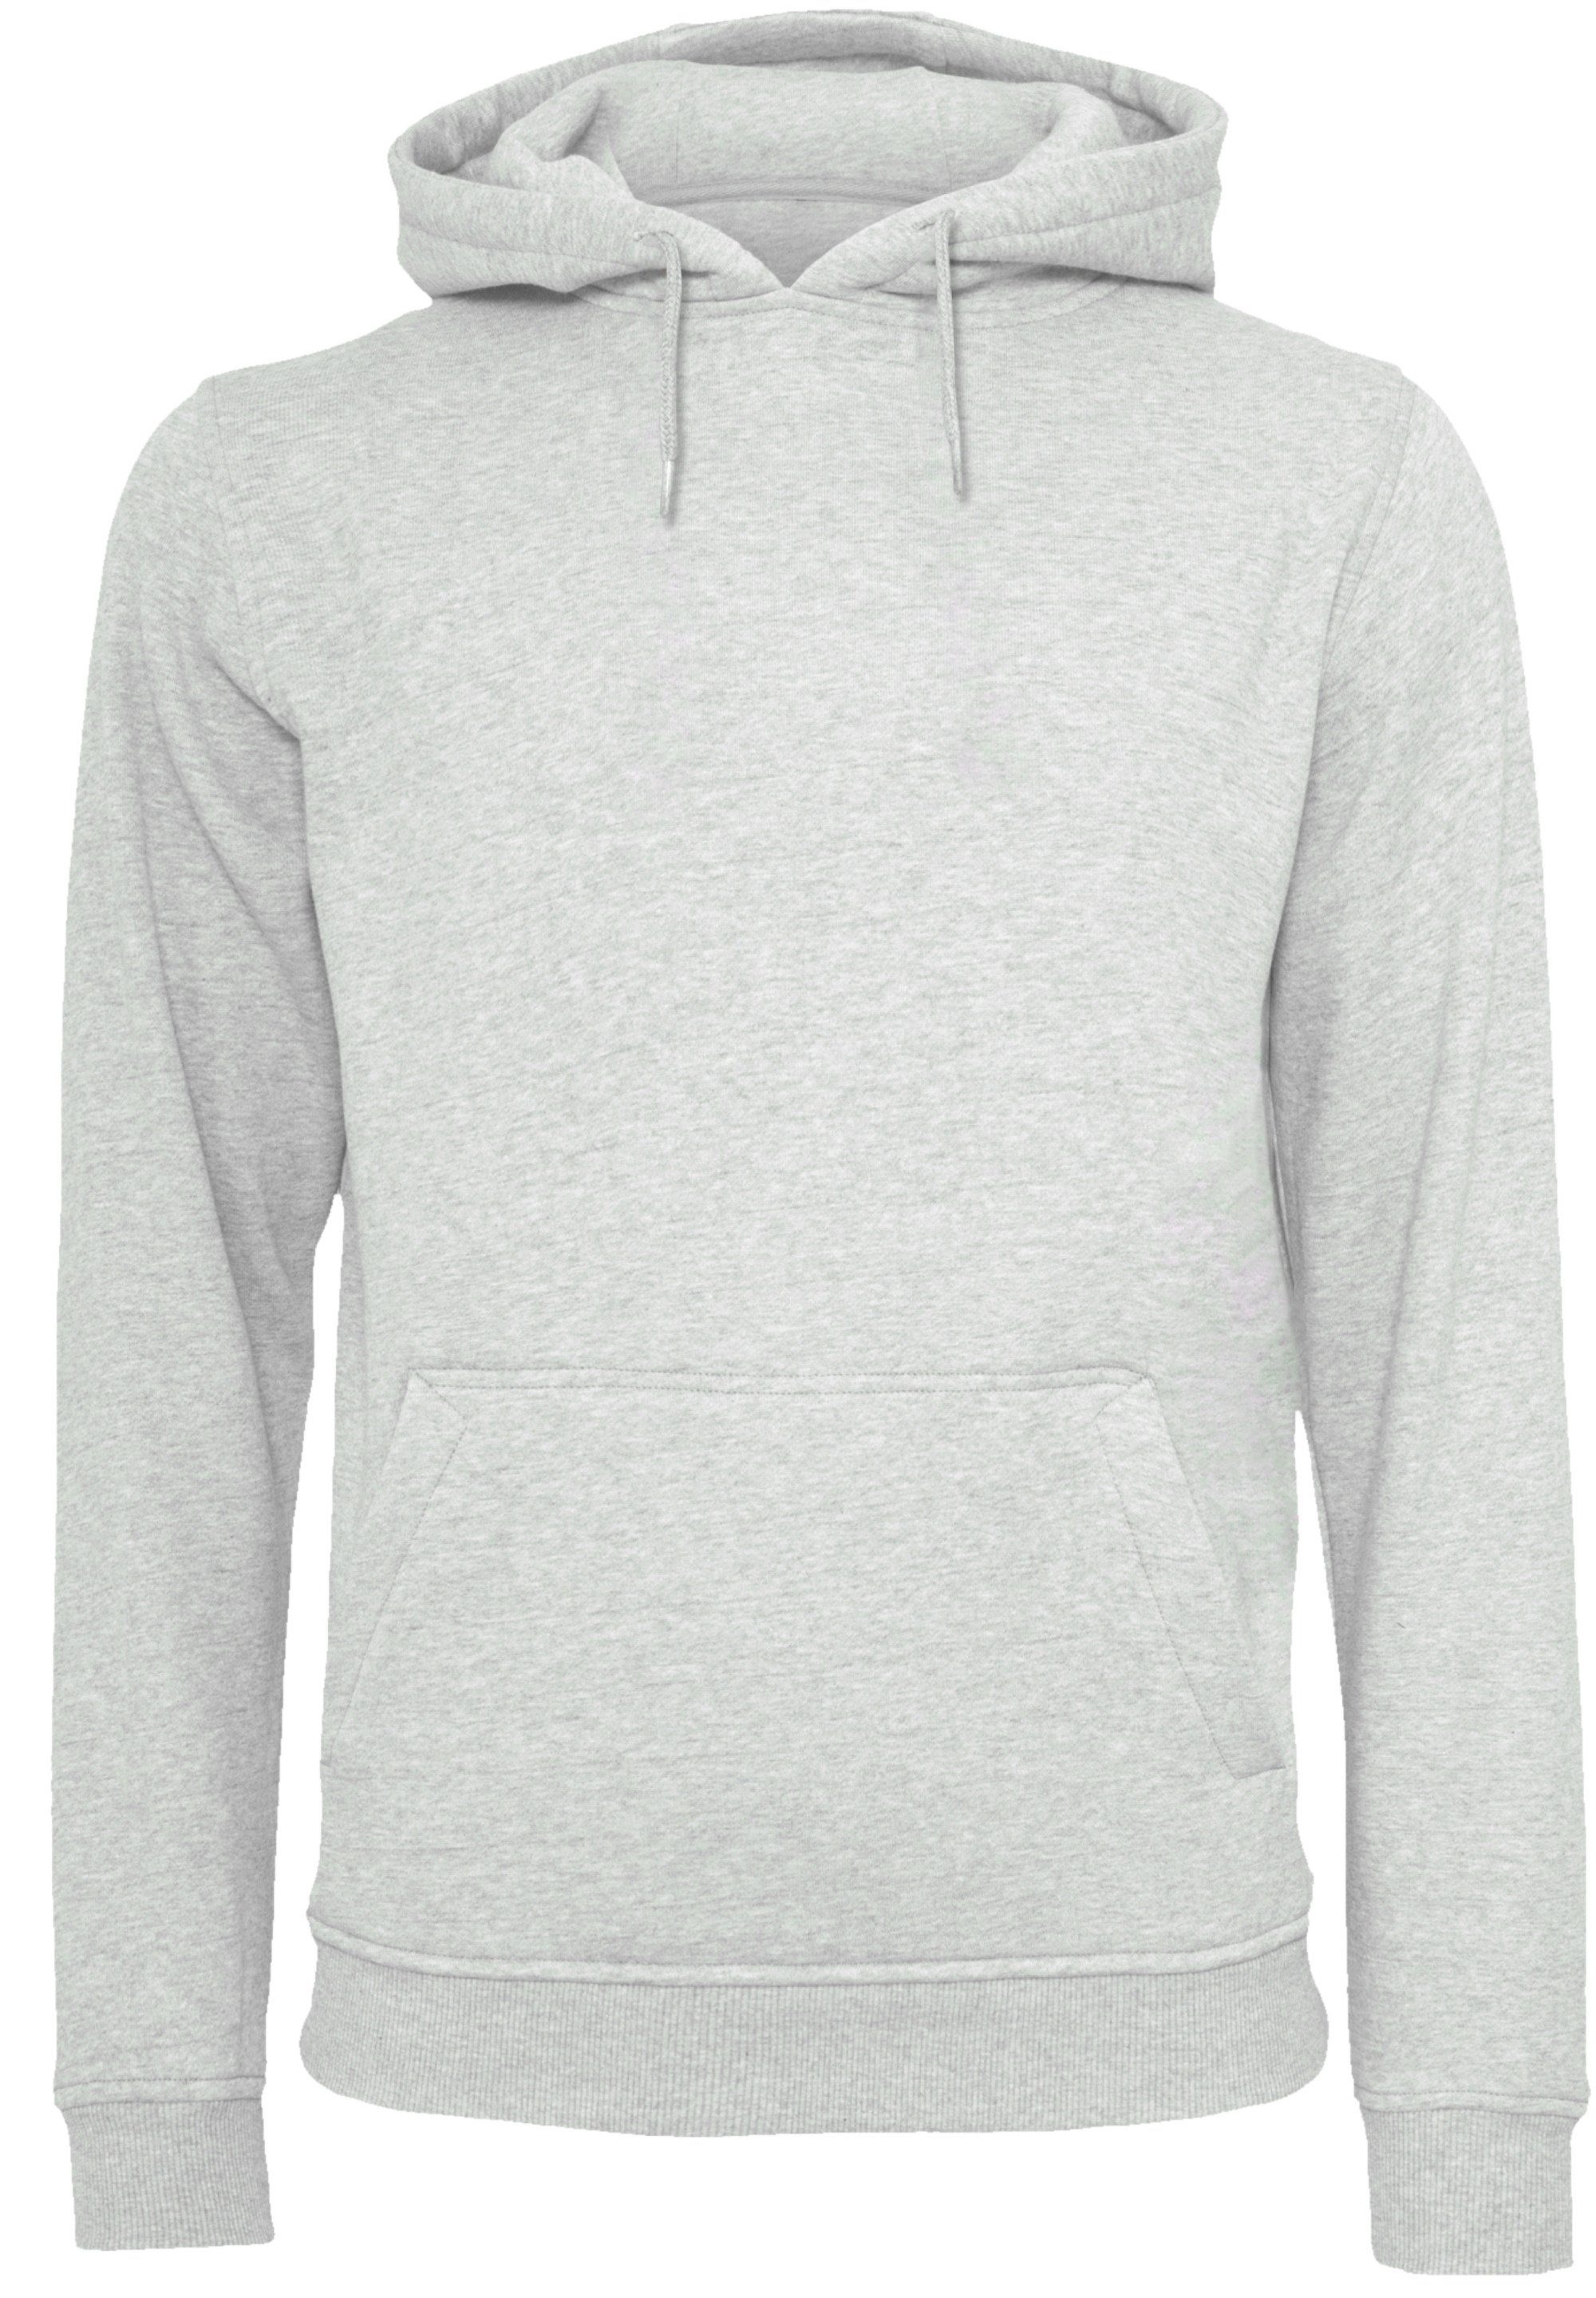 the Hoodie F4NT4STIC Band Logo Premium Qualität, The Doors grey Band, for Sun heather Music Waiting